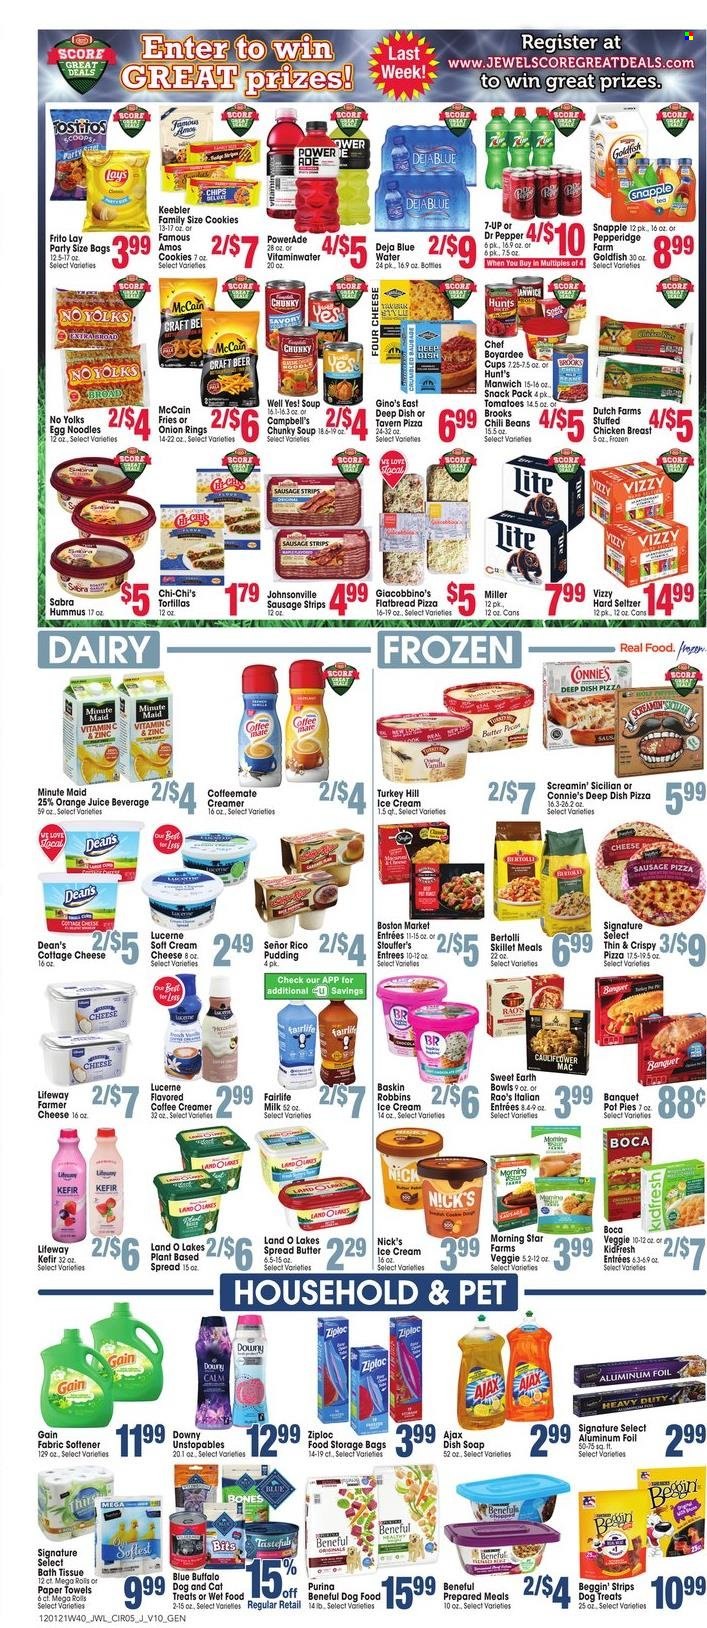 thumbnail - Jewel Osco Flyer - 12/01/2021 - 12/07/2021 - Sales products - tortillas, flatbread, pot pie, pizza, onion rings, soup, noodles, Bertolli, Johnsonville, sausage, hummus, cottage cheese, cream cheese, farmer cheese, pudding, milk, kefir, butter, creamer, ice cream, strips, McCain, Screamin' Sicilian, cookies, Keebler, Goldfish, chili beans, Manwich, Chef Boyardee, egg noodles, Powerade, orange juice, juice, Dr. Pepper, 7UP, Snapple, fruit punch, Hard Seltzer, beer, Miller, chicken breasts, bath tissue, kitchen towels, paper towels, Gain, Unstopables, fabric softener, soap, Ziploc, storage bag, pan, cup, aluminium foil, animal food, Blue Buffalo, dog food, Purina, Beggin', zinc. Page 5.